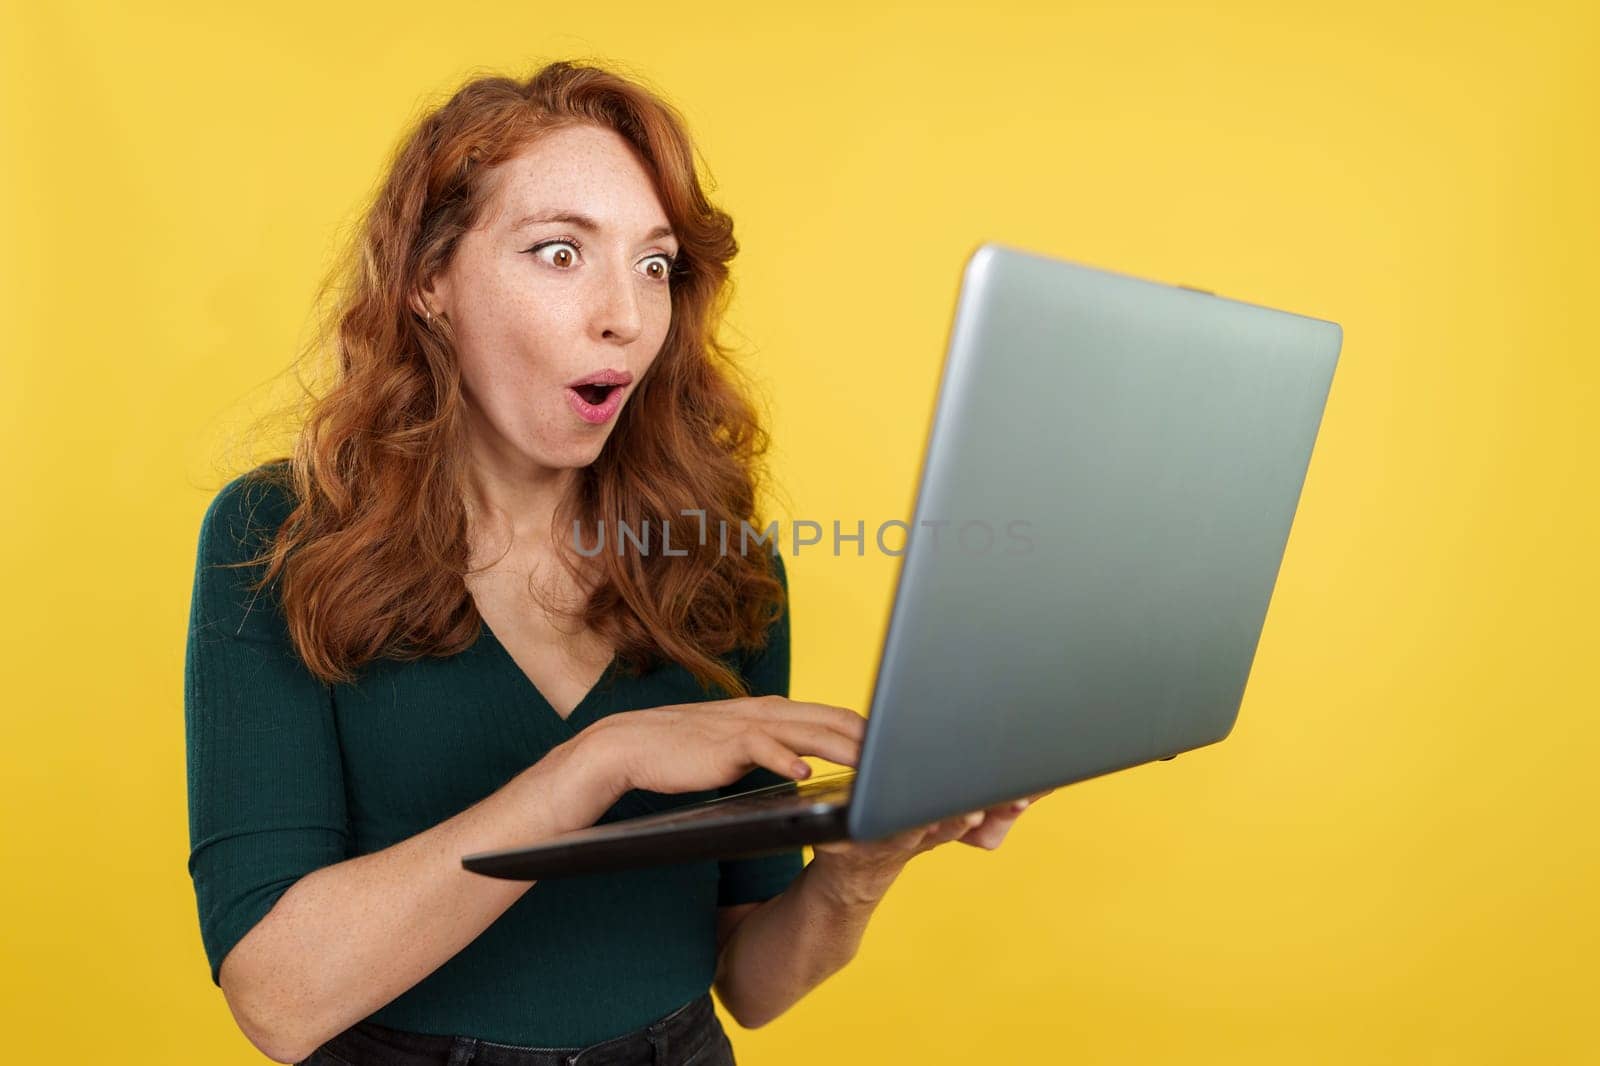 Surprised redheaded woman using a laptop while smiling in studio with yellow background